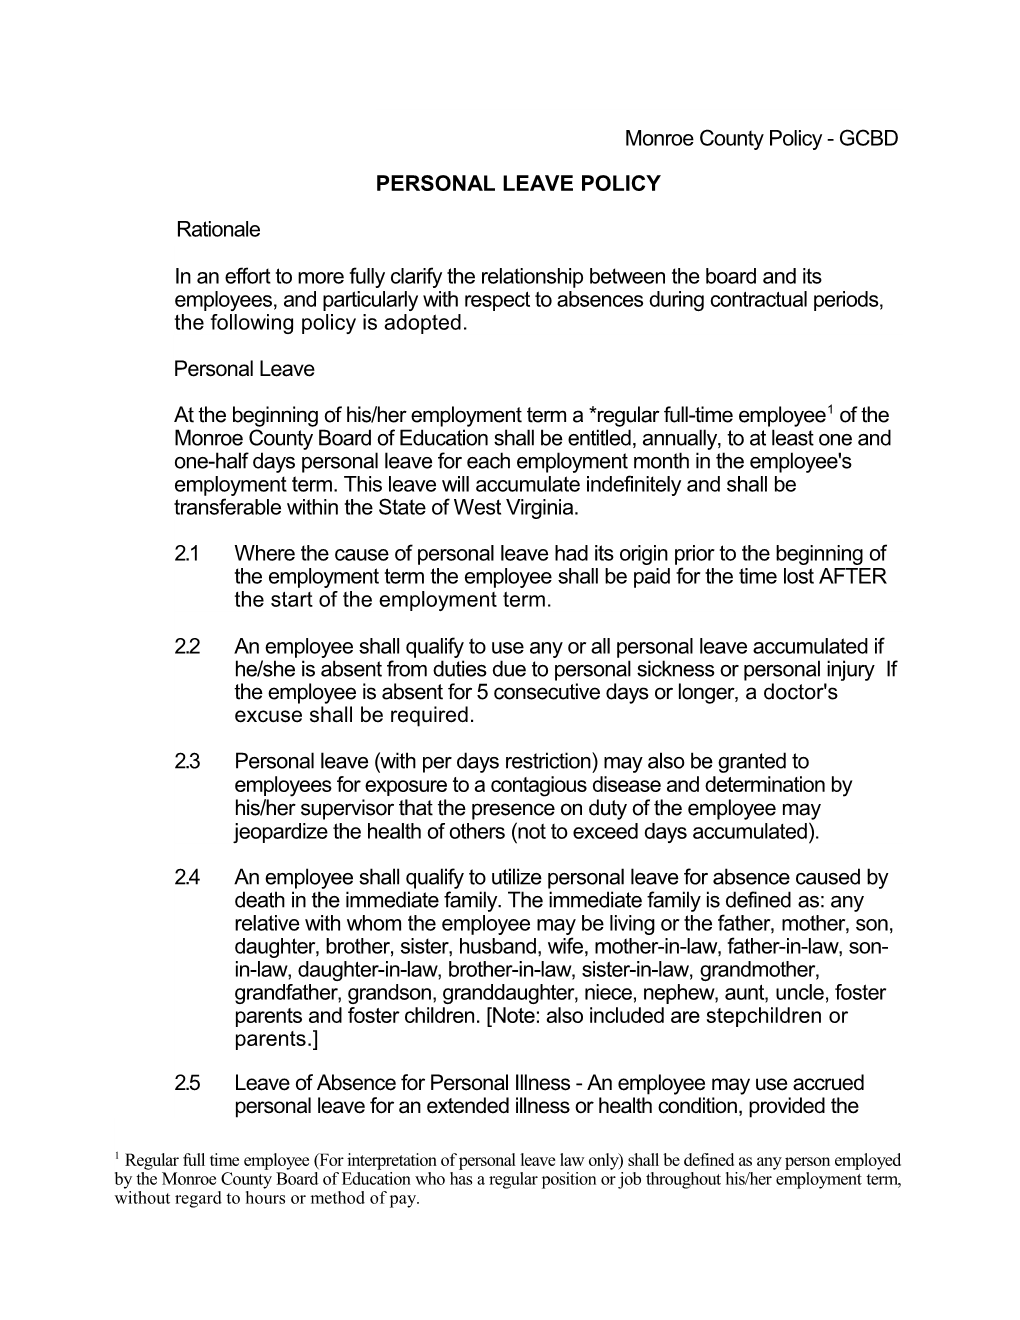 Monroe County Policy - GCBD PERSONAL LEAVE POLICY